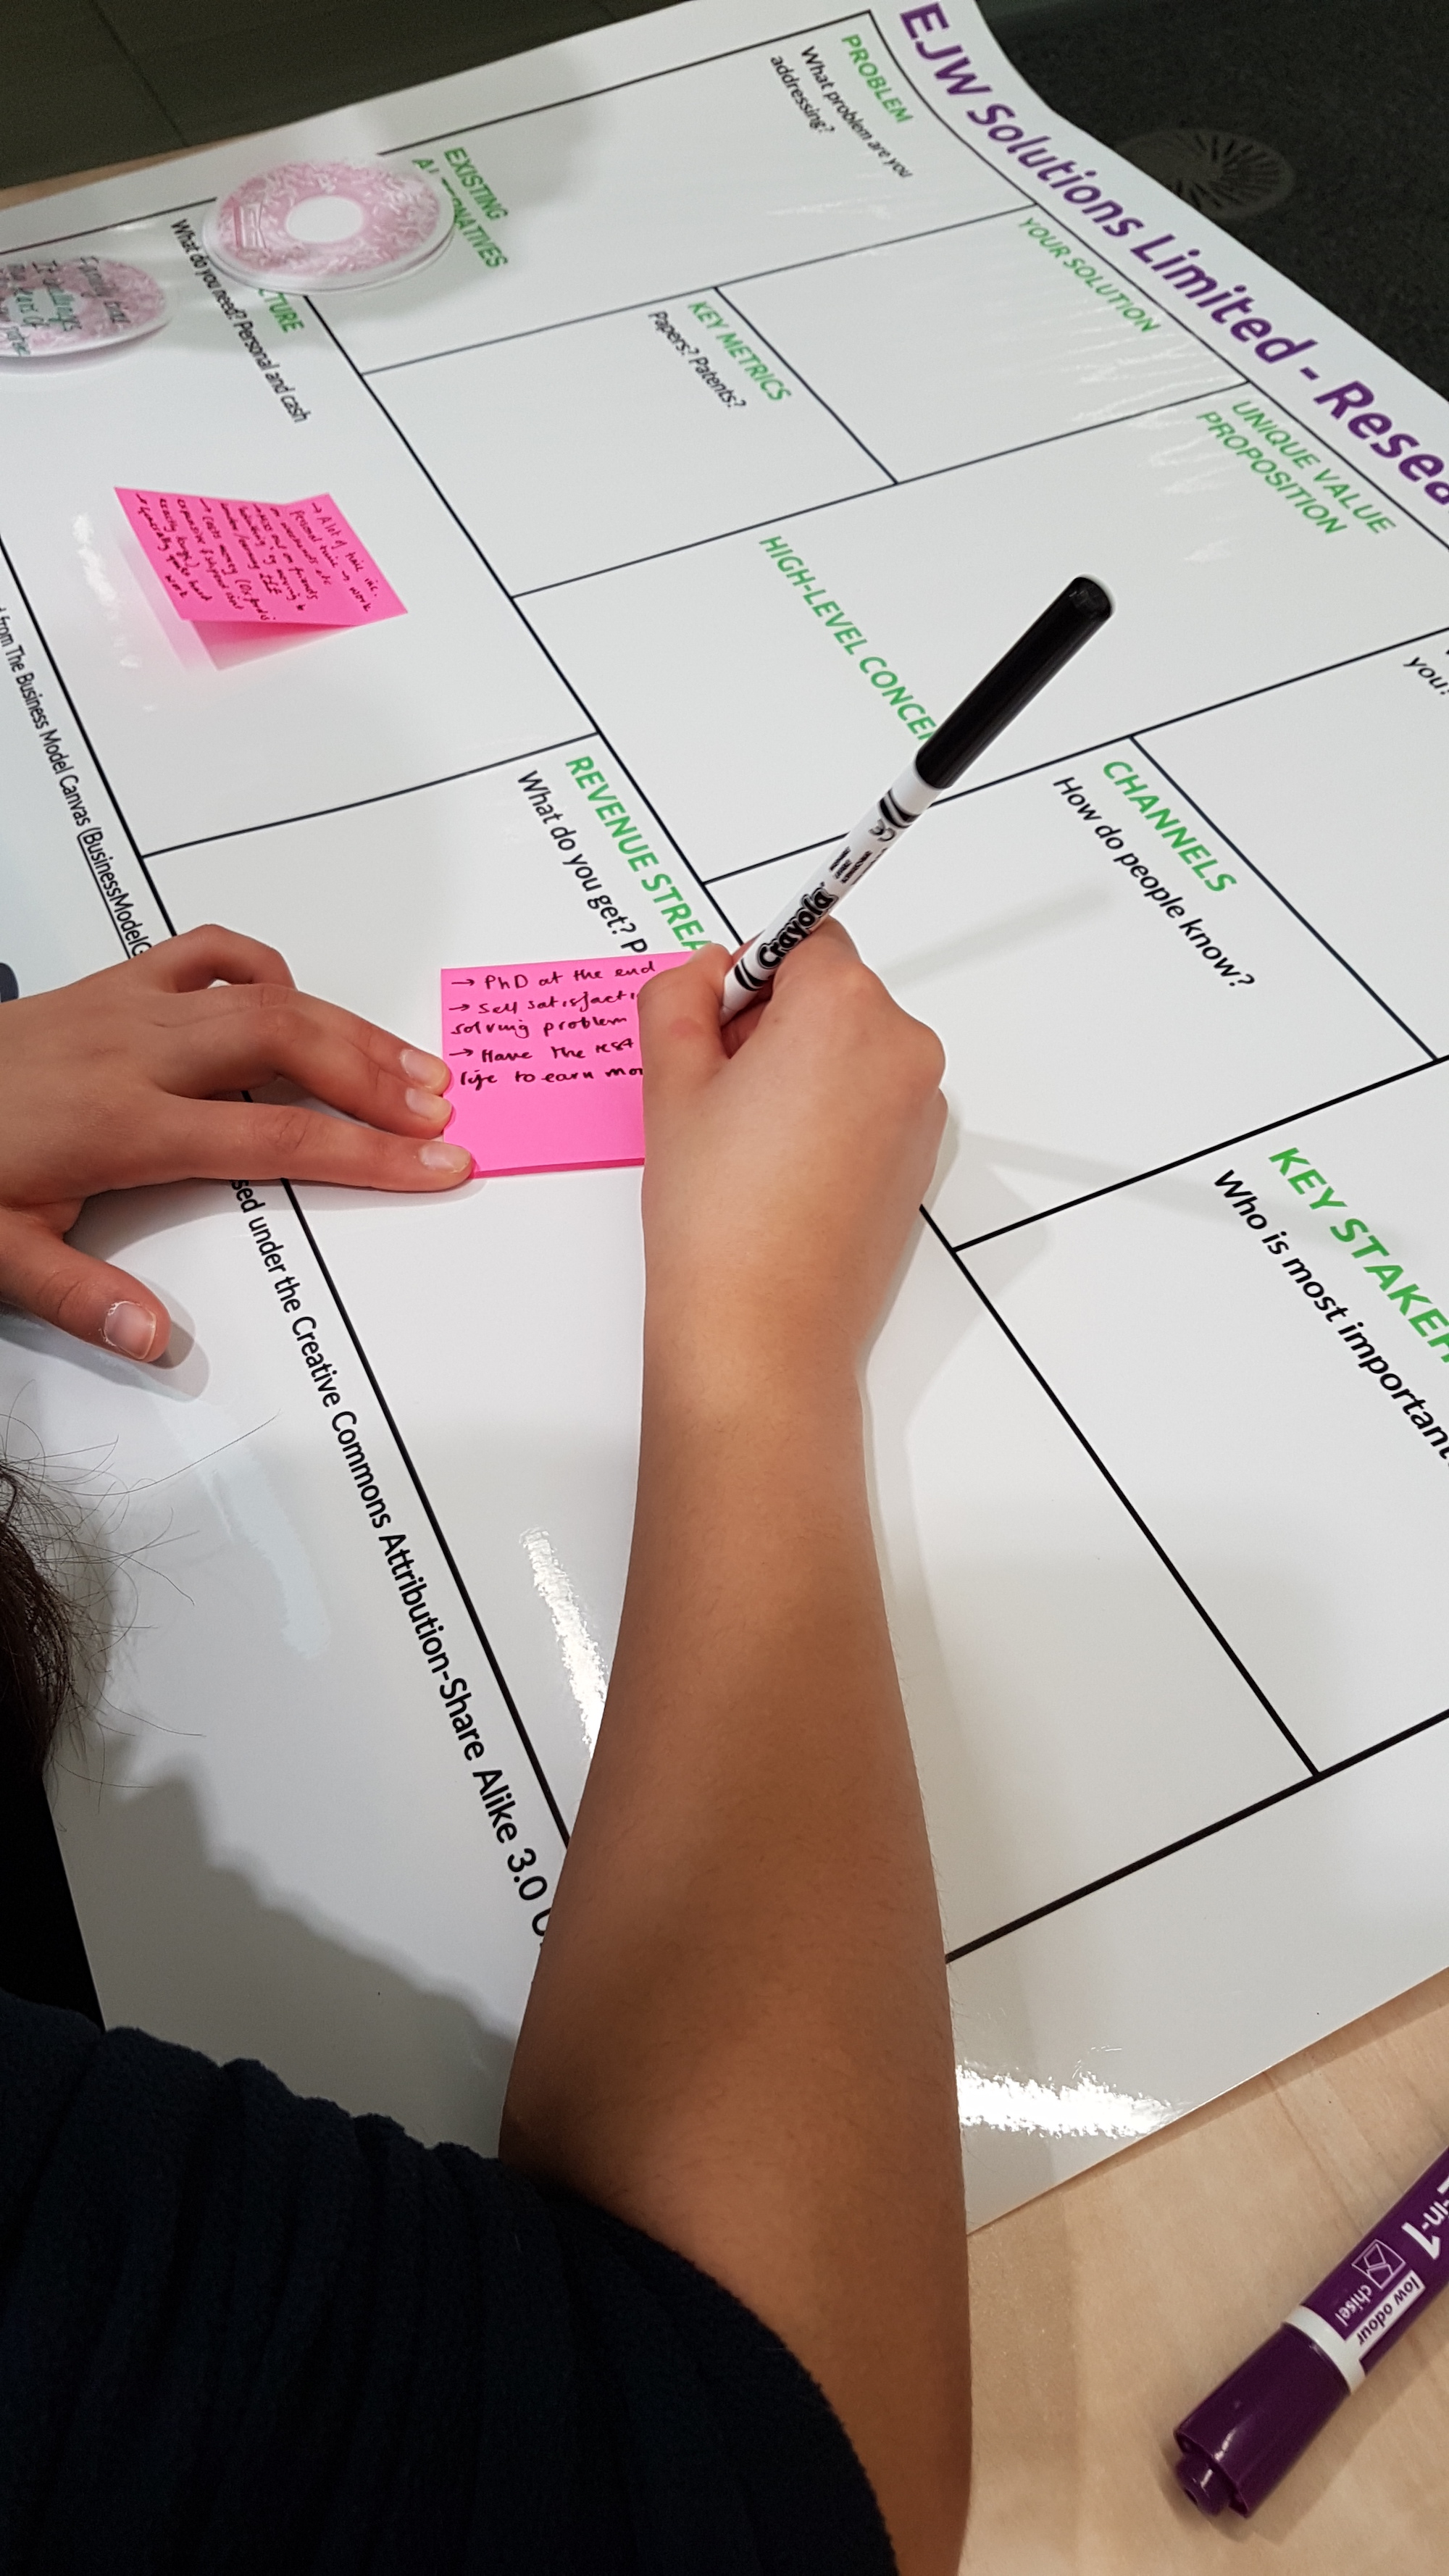 A researcher writing on post-its on a canvas